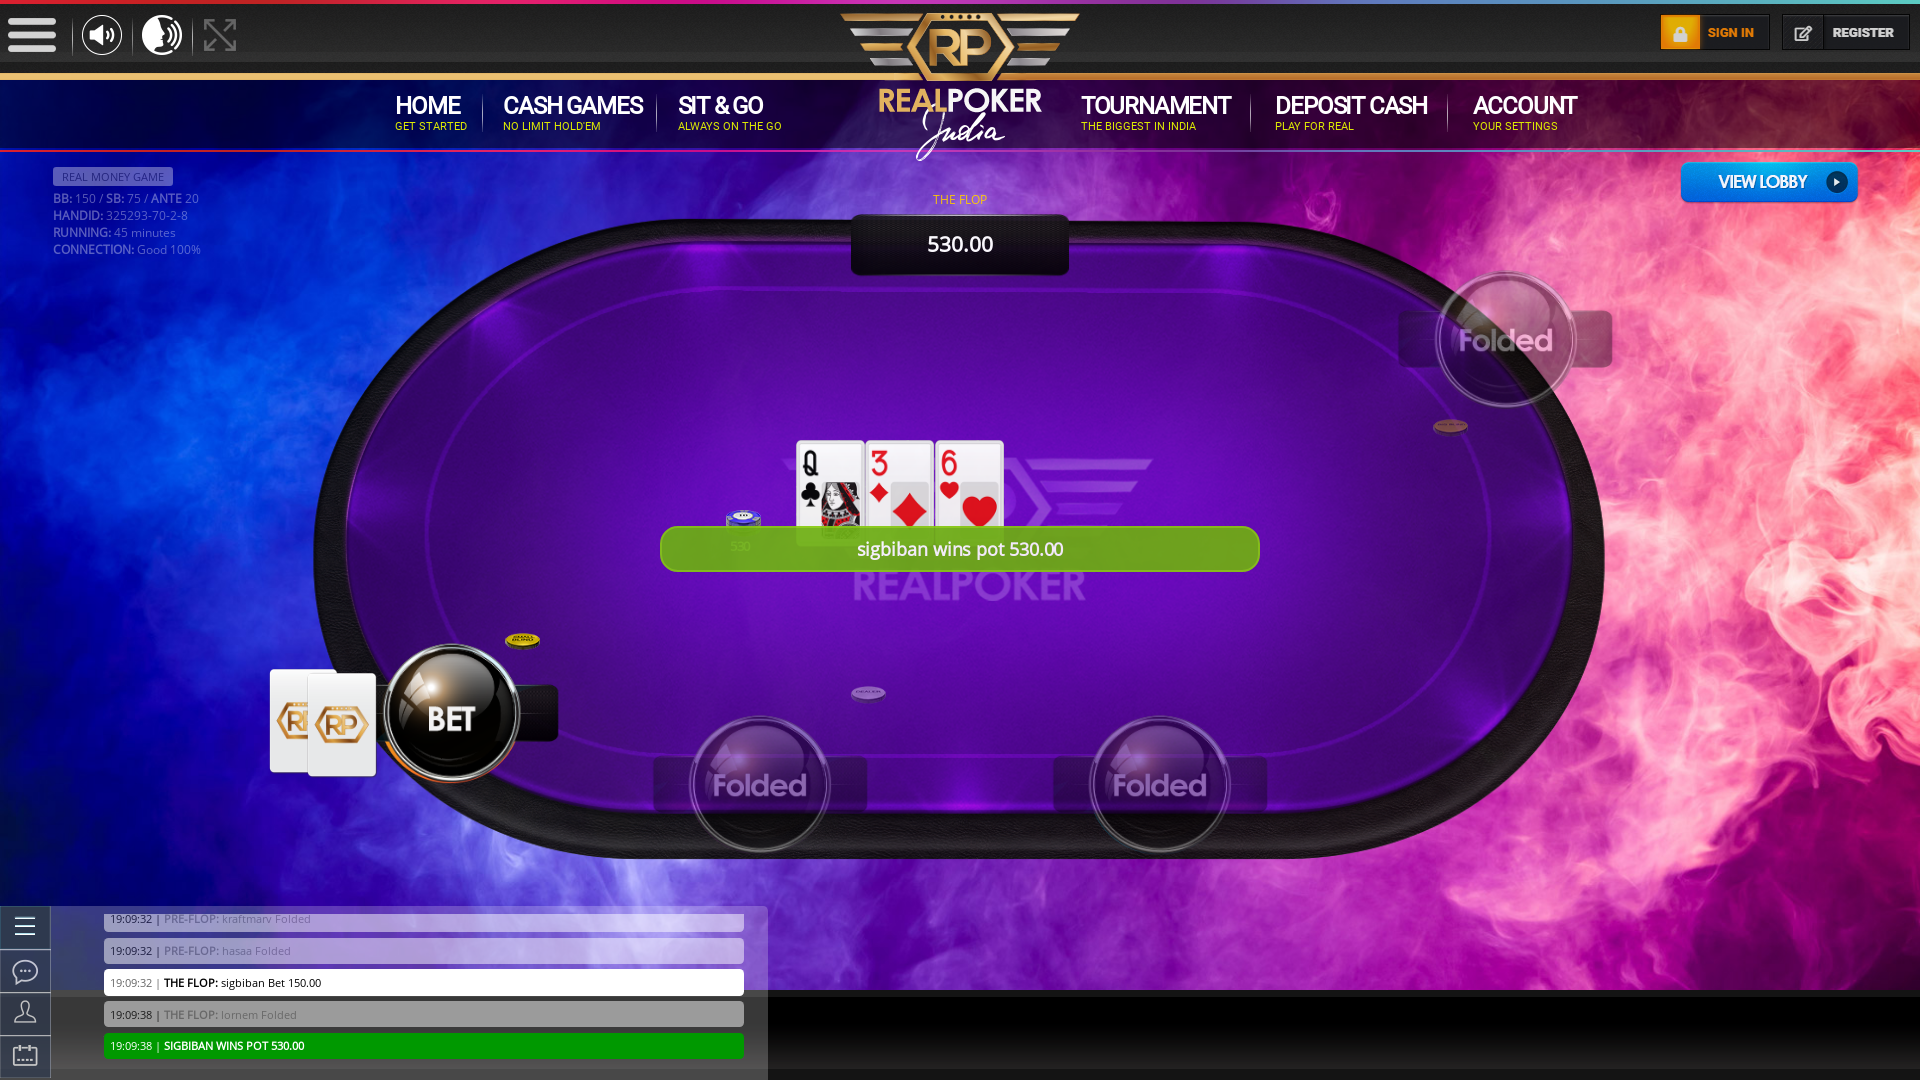 Sesharipuram, Bangalore online poker game on a 10 player table in the 45th minute